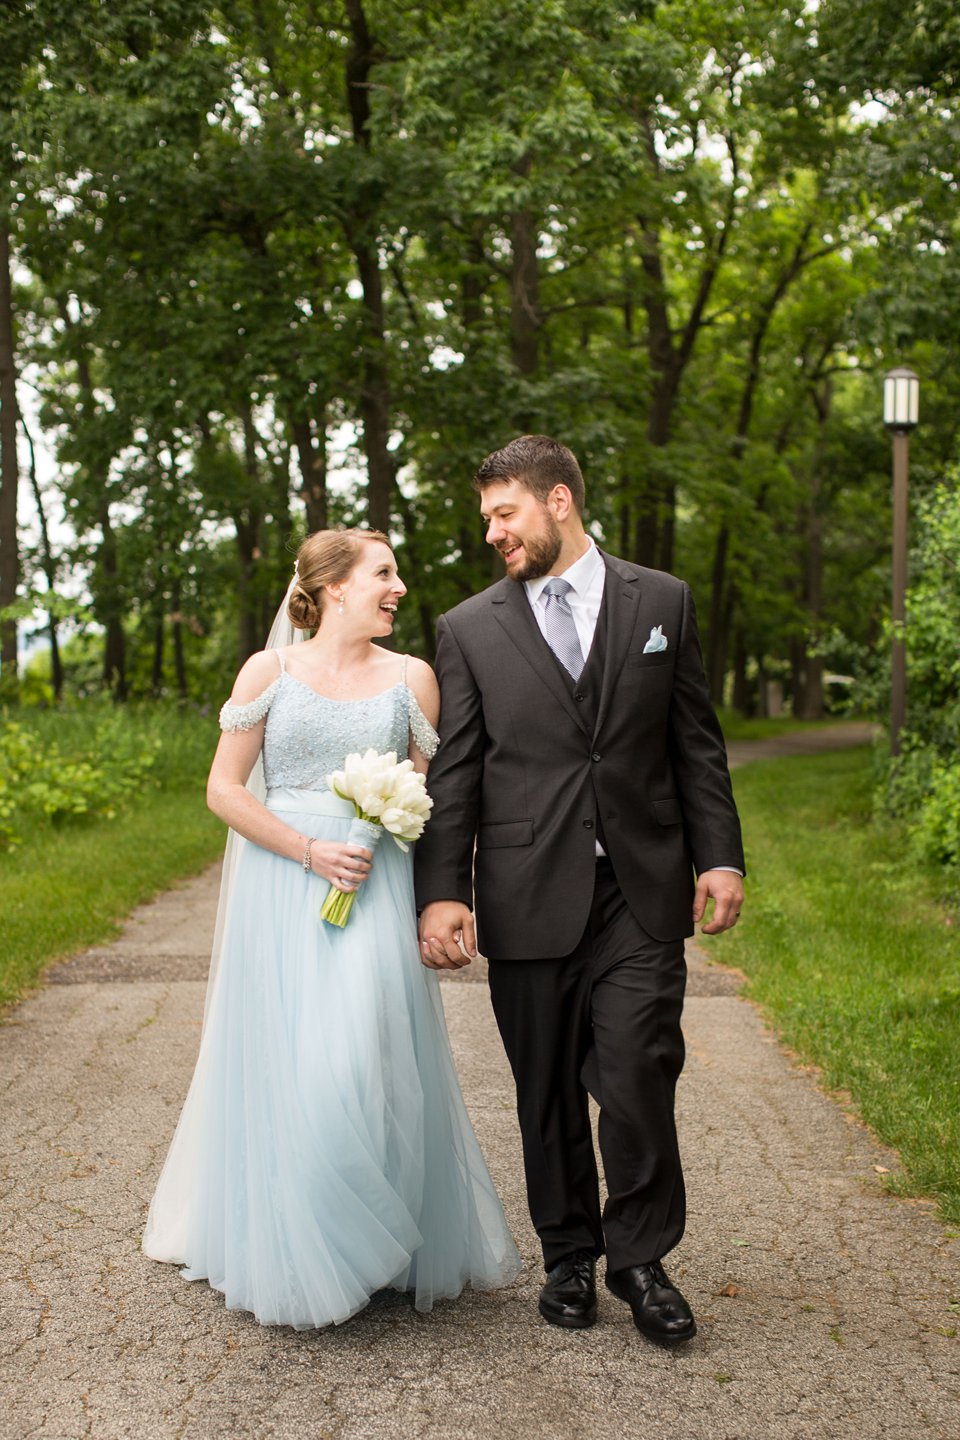 Wedding photographs in the forest at the Kellogg Manor House